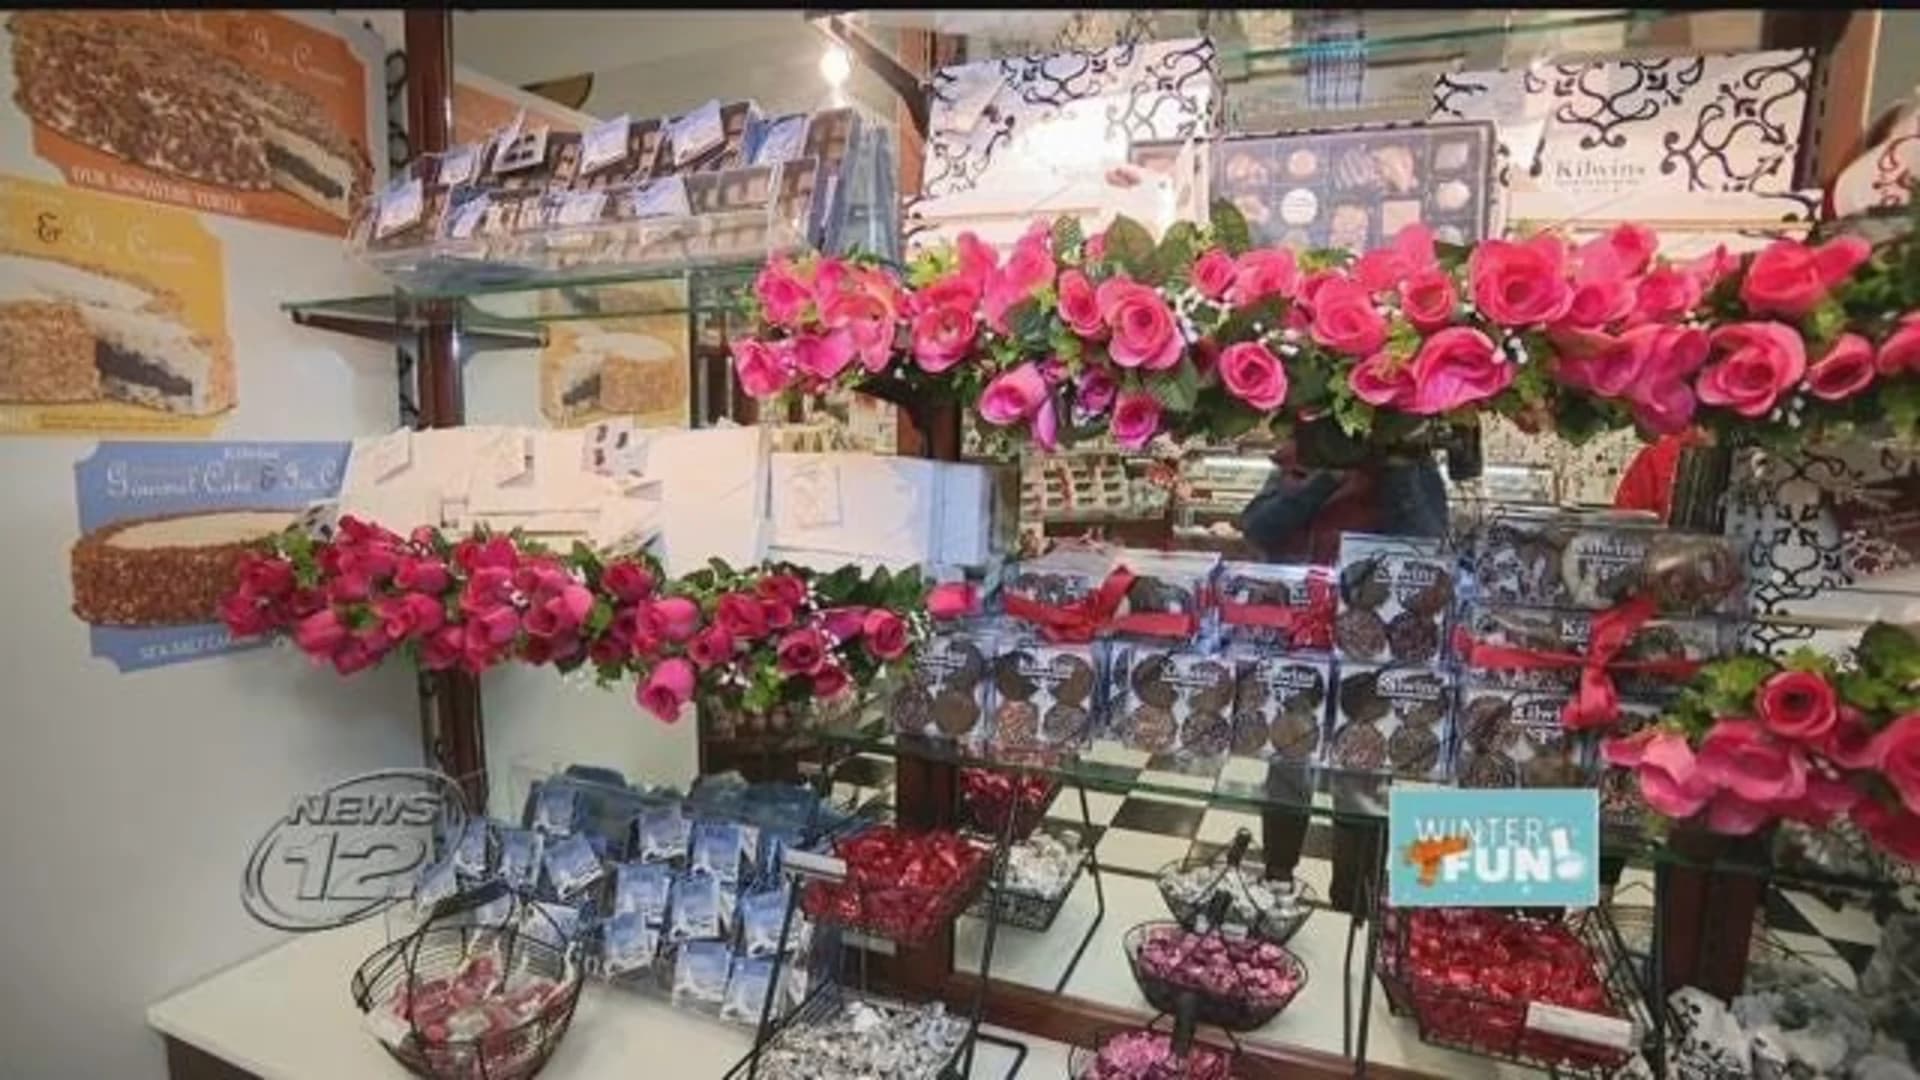 Kilwins in Patchogue serves up sweet treats for Valentine’s Day